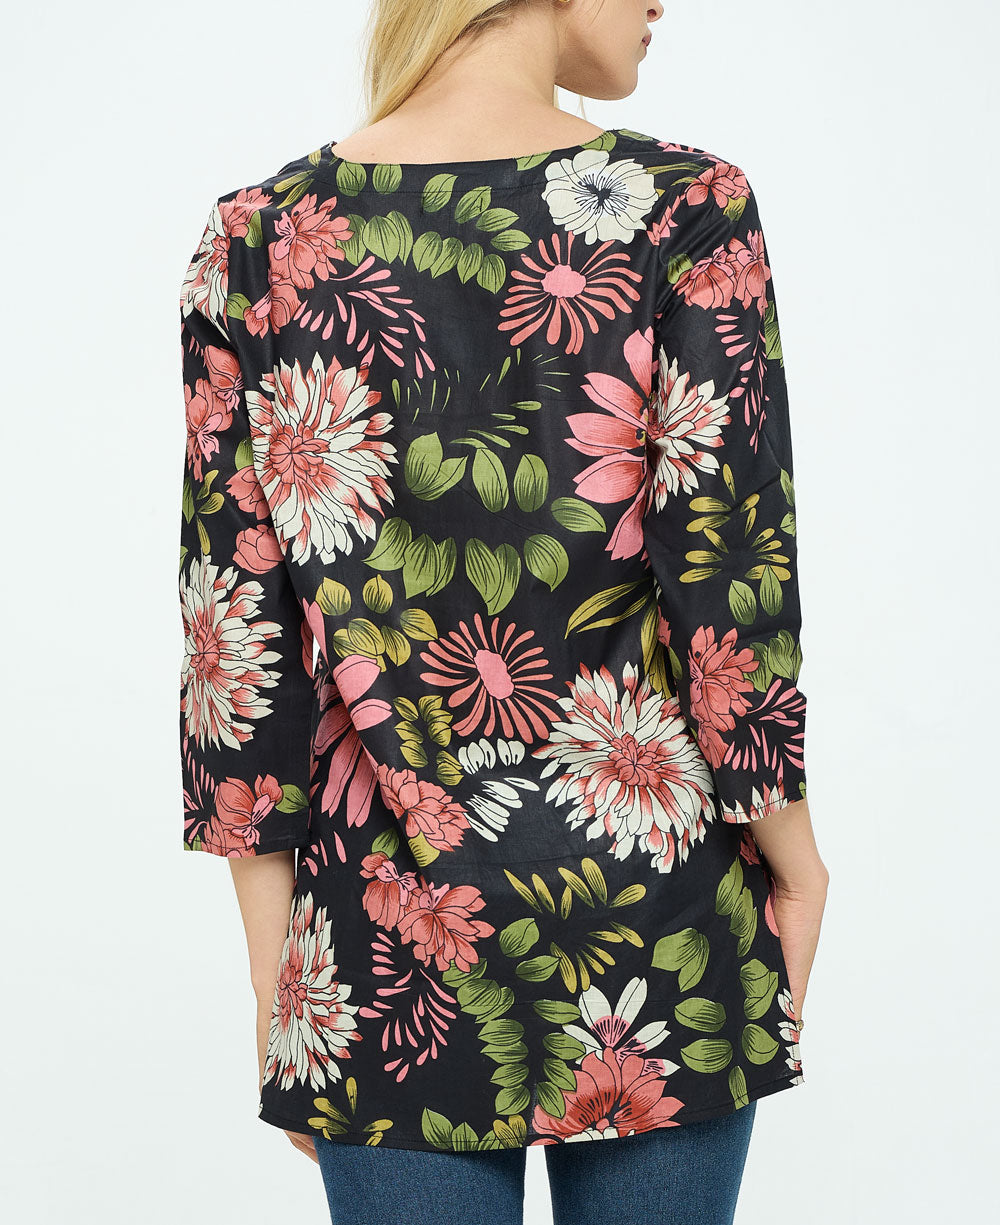 Black Floral Tunic top